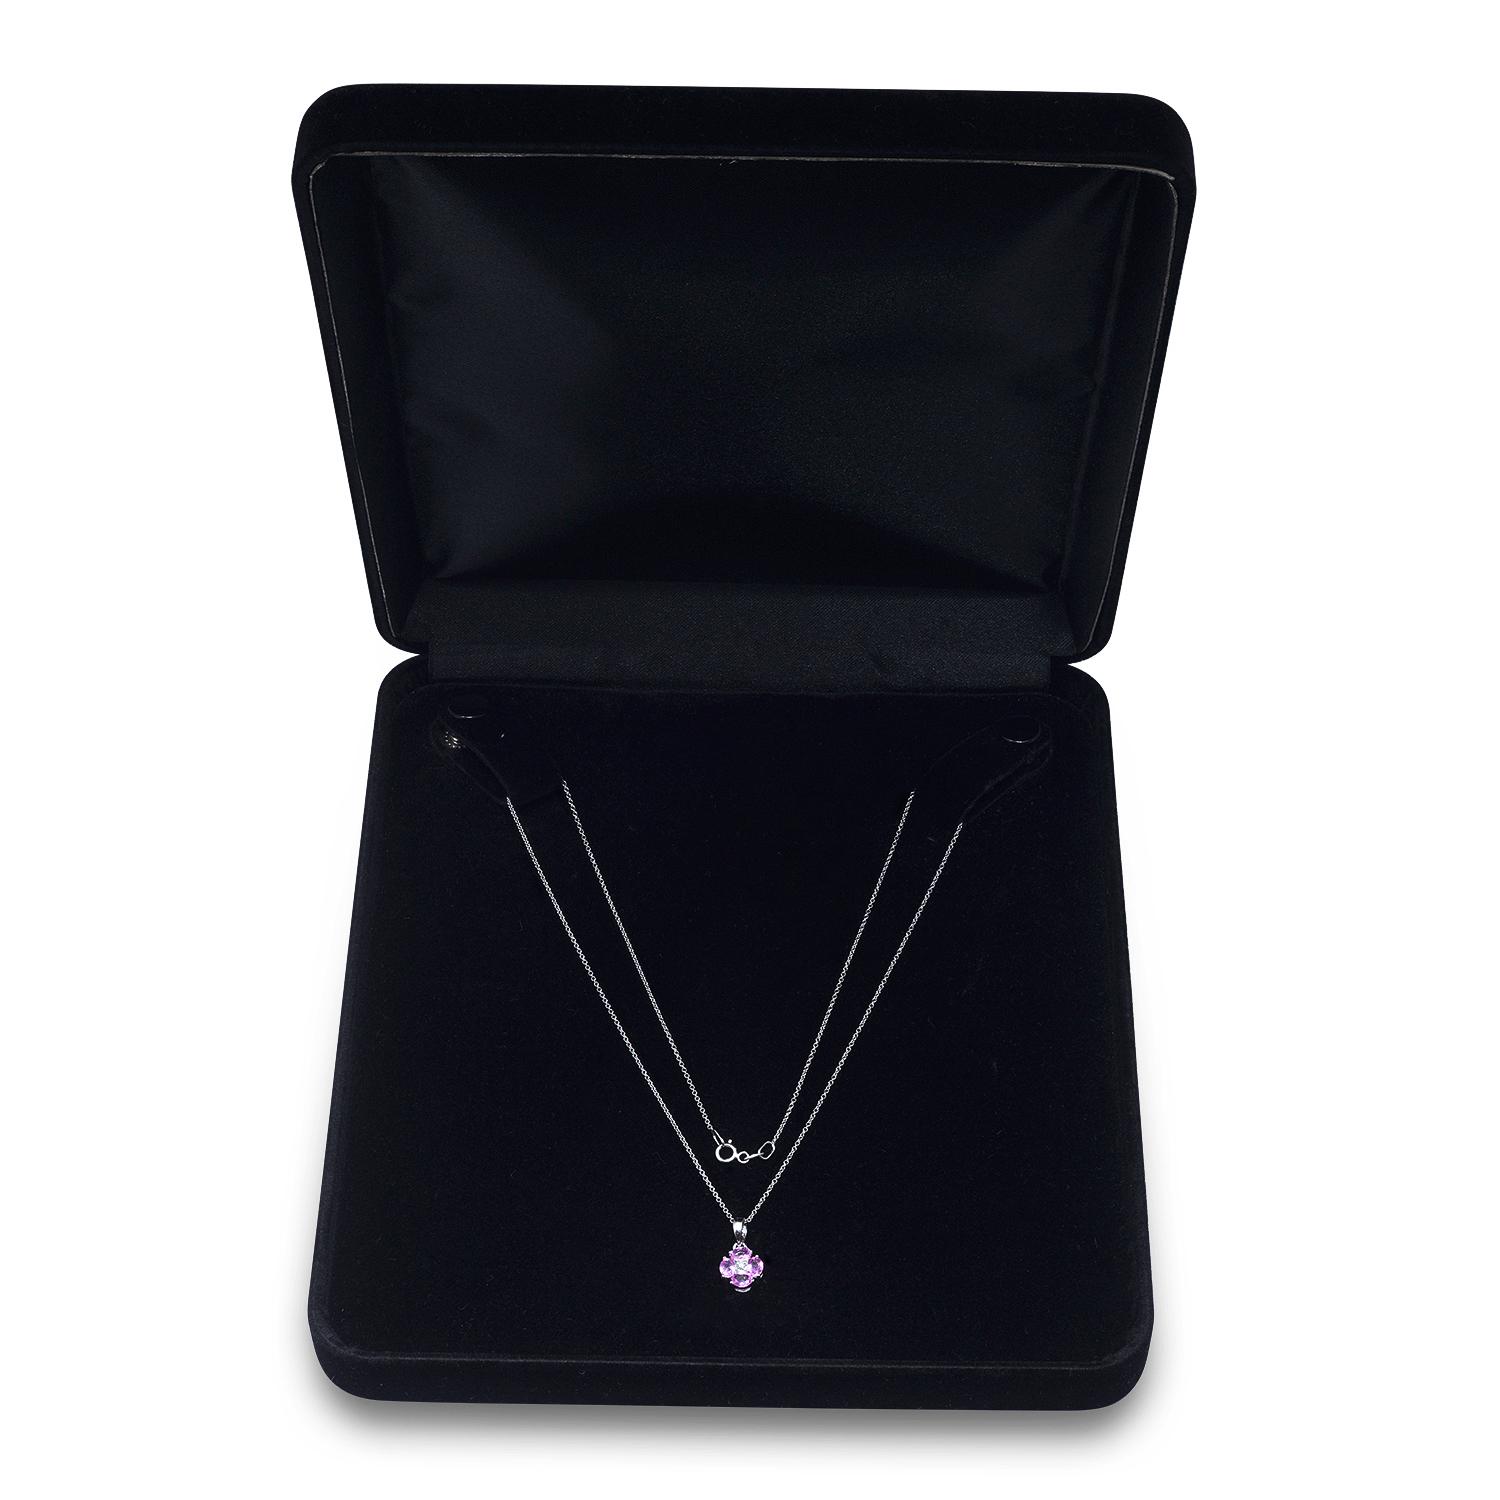 14K White Gold Setting with 0.40ct Pink Sapphire and 0.02ct Diamond Pendant